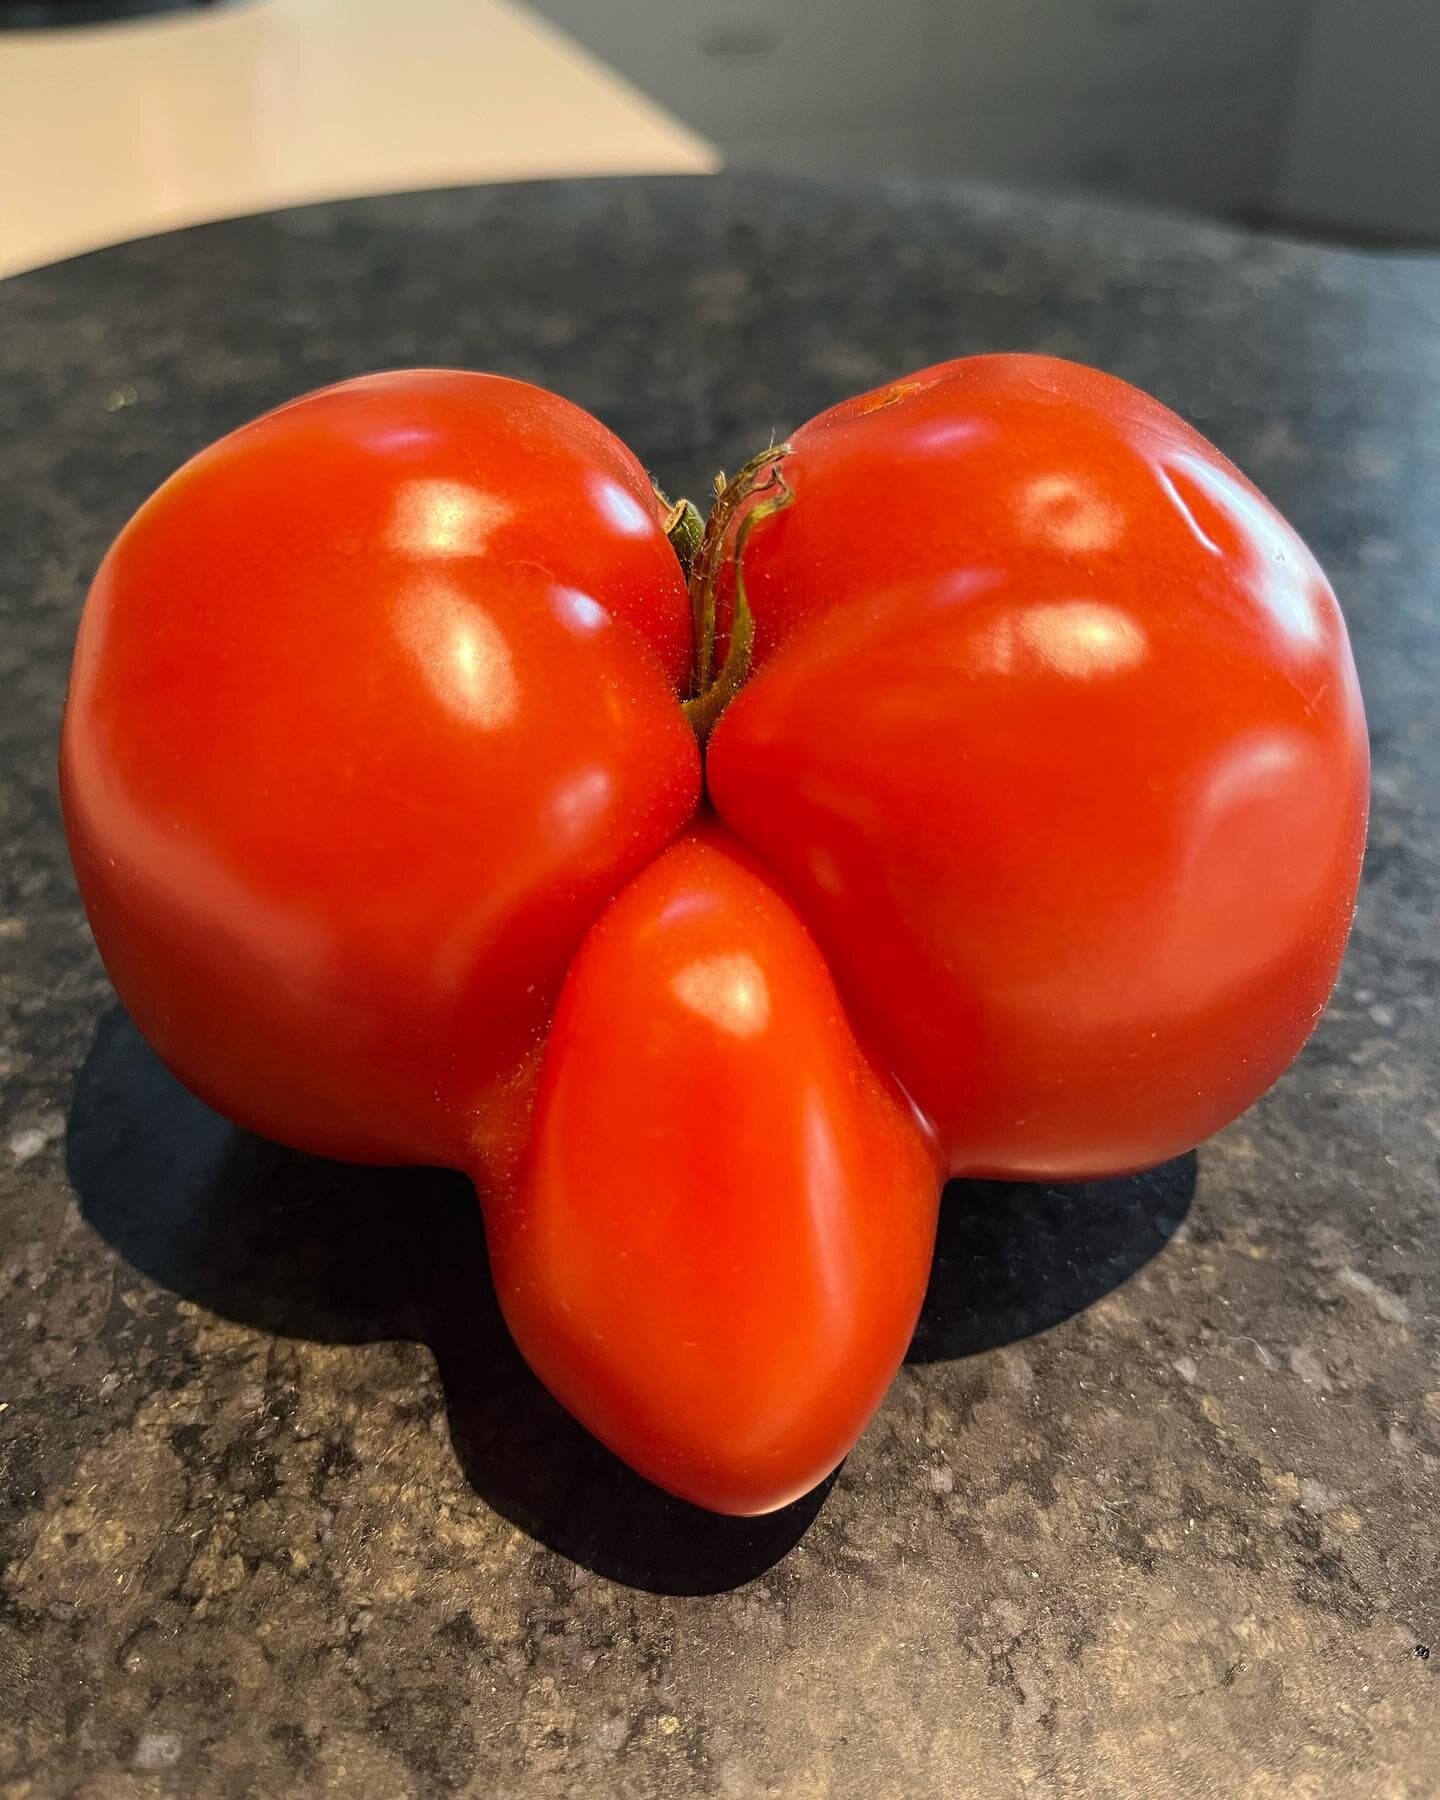 I didn&rsquo;t  know that tomatoes can come in shapes like this. What are you thinking? 🤭
Bought from Verduci fruits &amp; Veggies at the @riverinaproducersmarket There&rsquo;s always full of surprises when you turn up at this Thursday market 😜